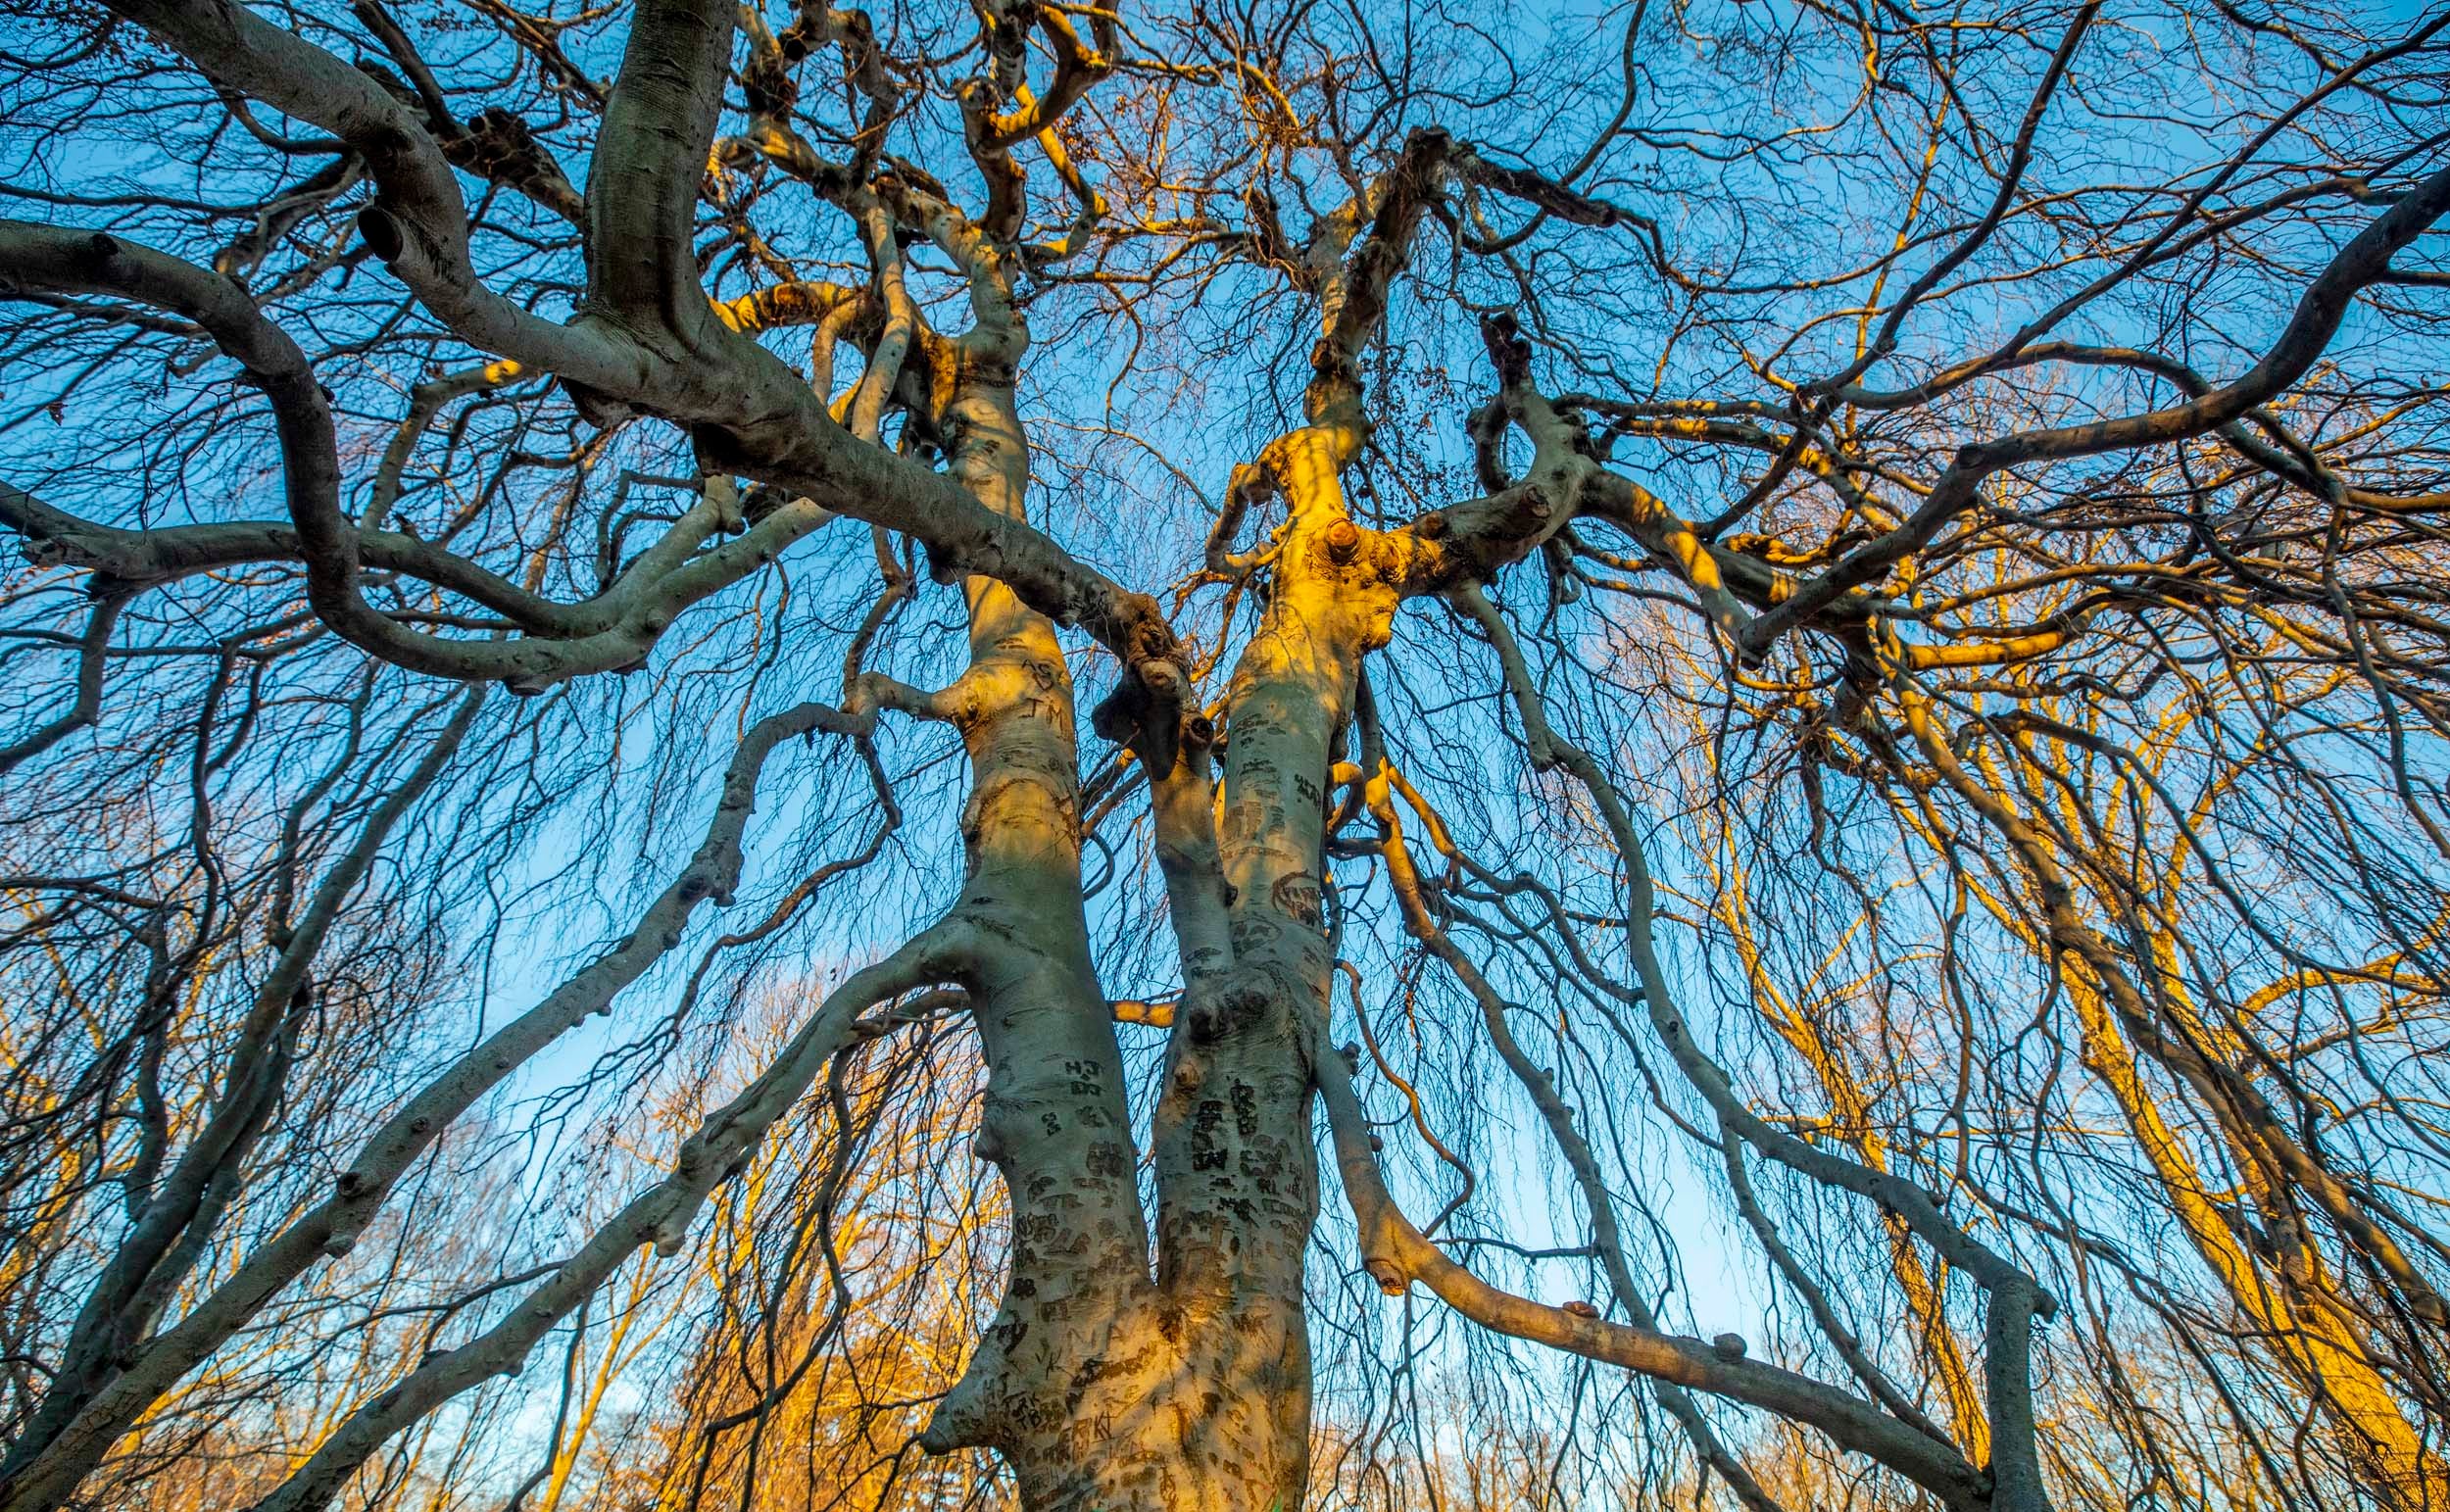 The Pendula, a European Beech Tree, is part of Beech Tree collection on Beech Path in the Arnold Arboretum.